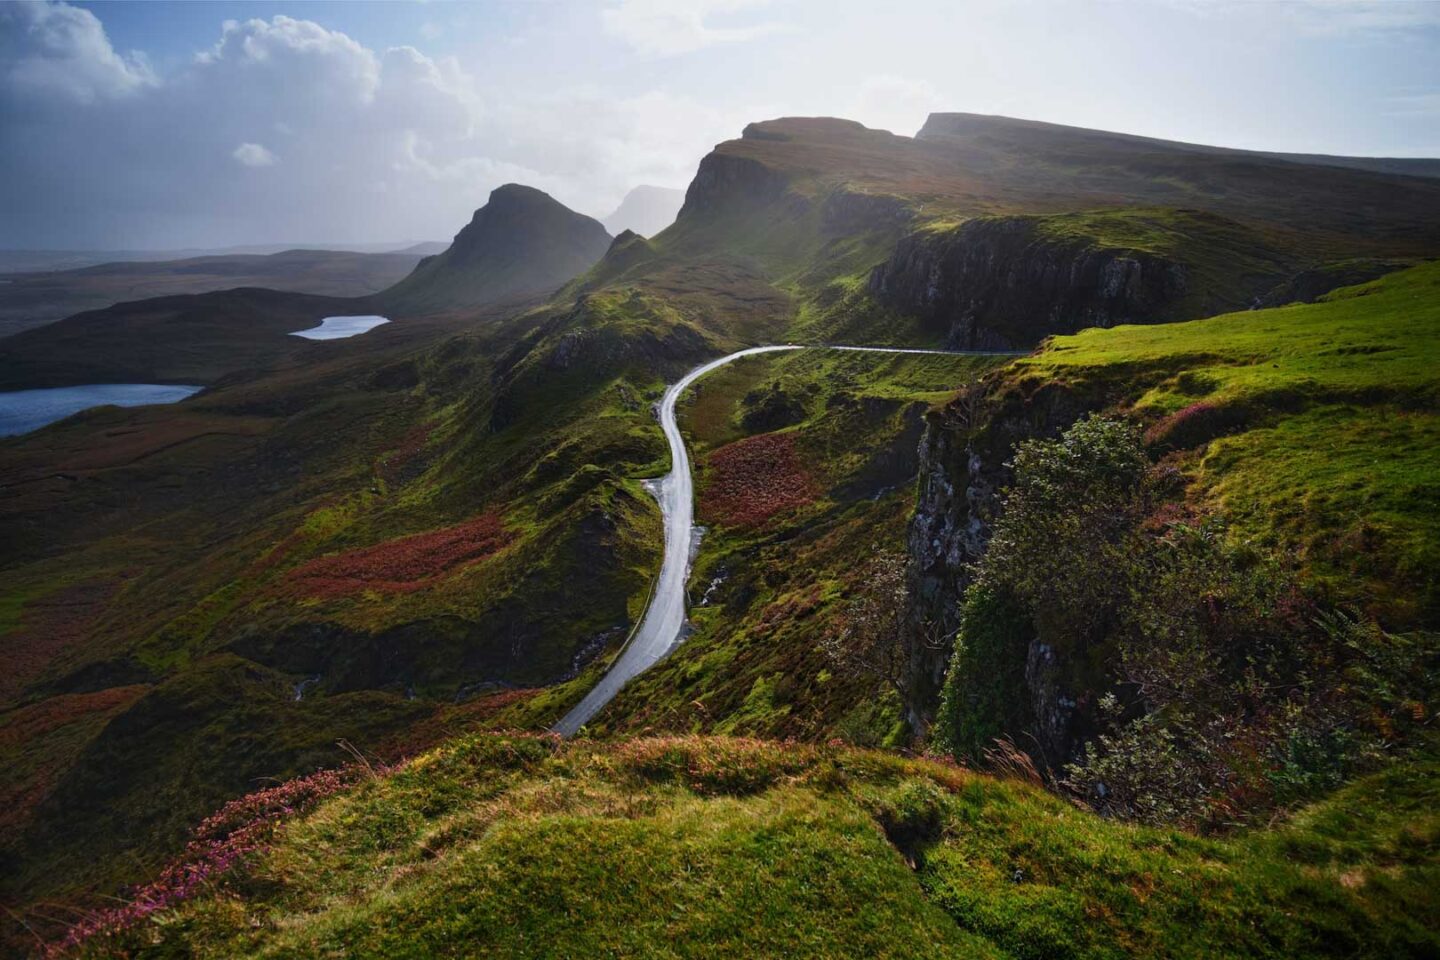 The Quariang Pass in Skye